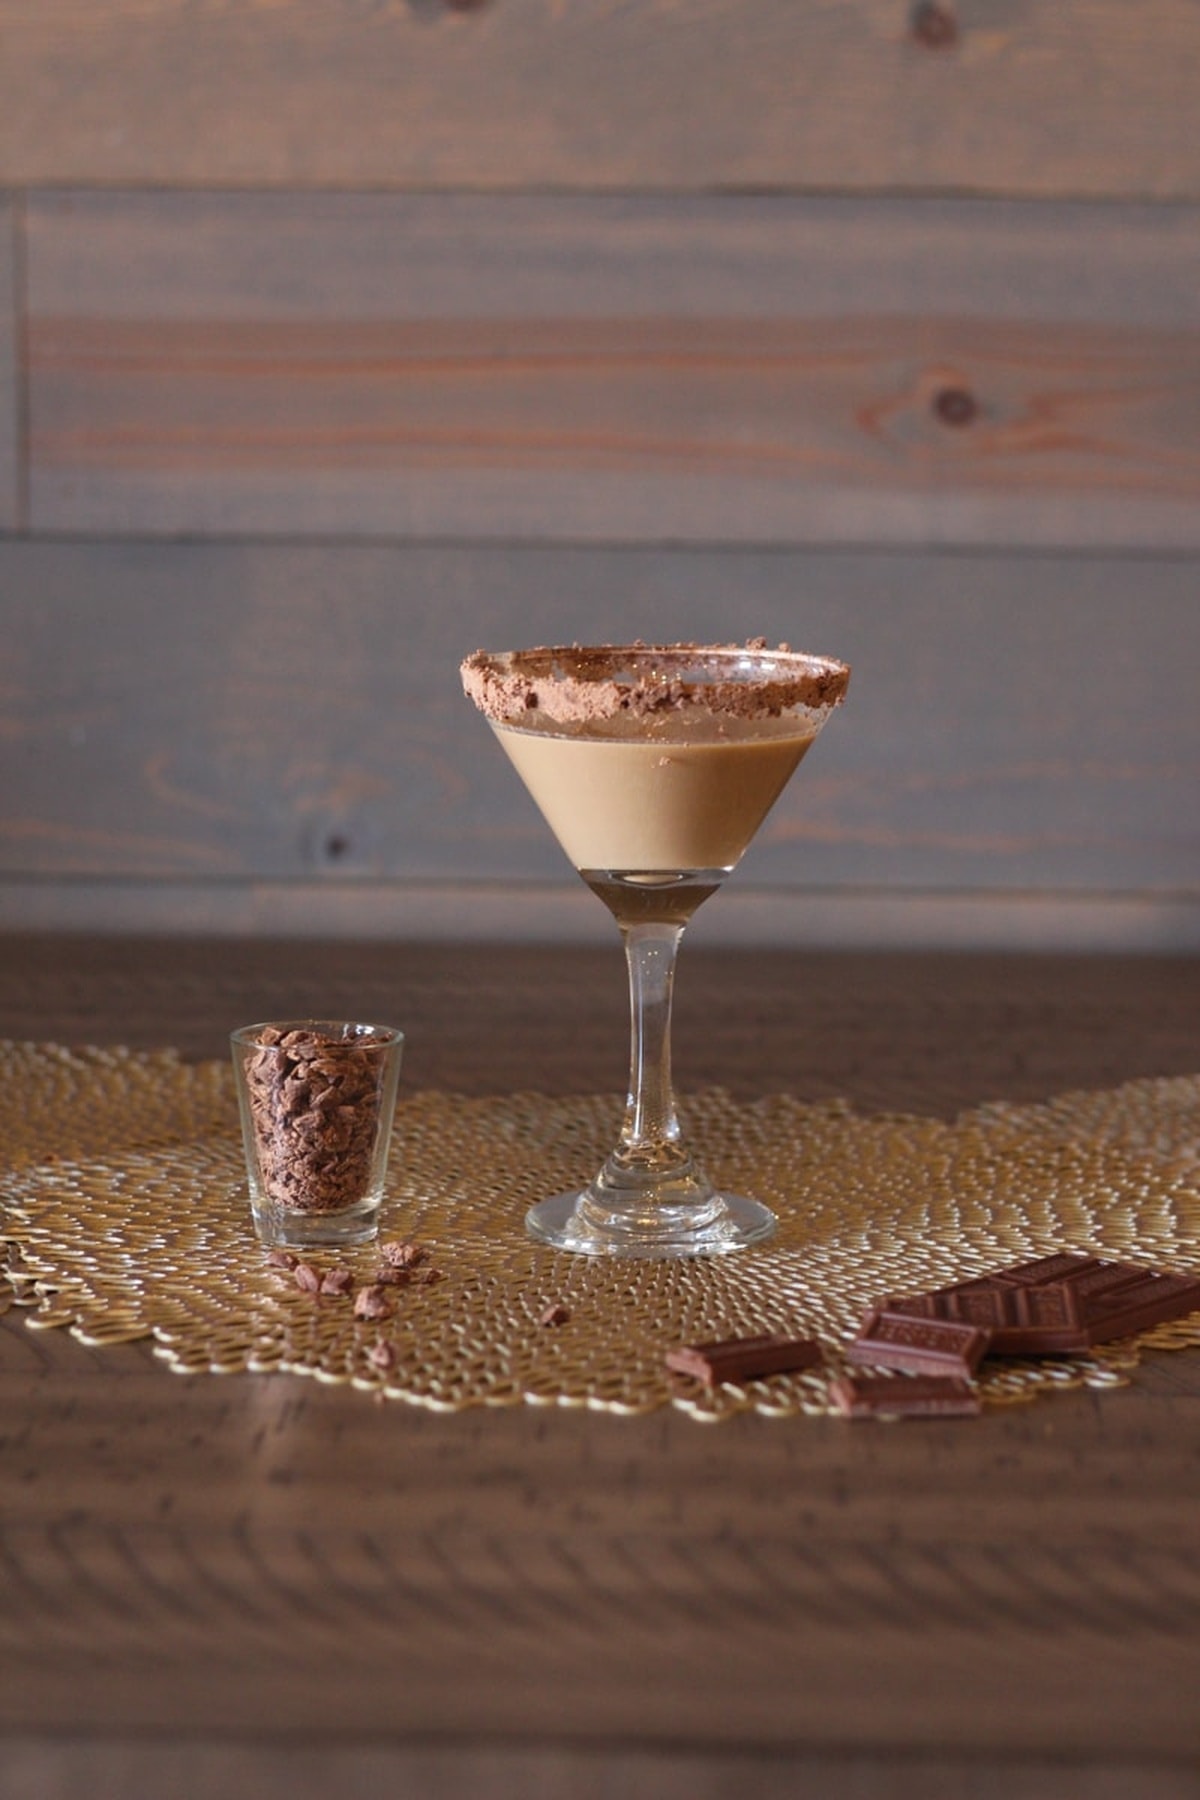 A glass of Baileys Chocolate Martini and a glass of chocolate shavings on a table.